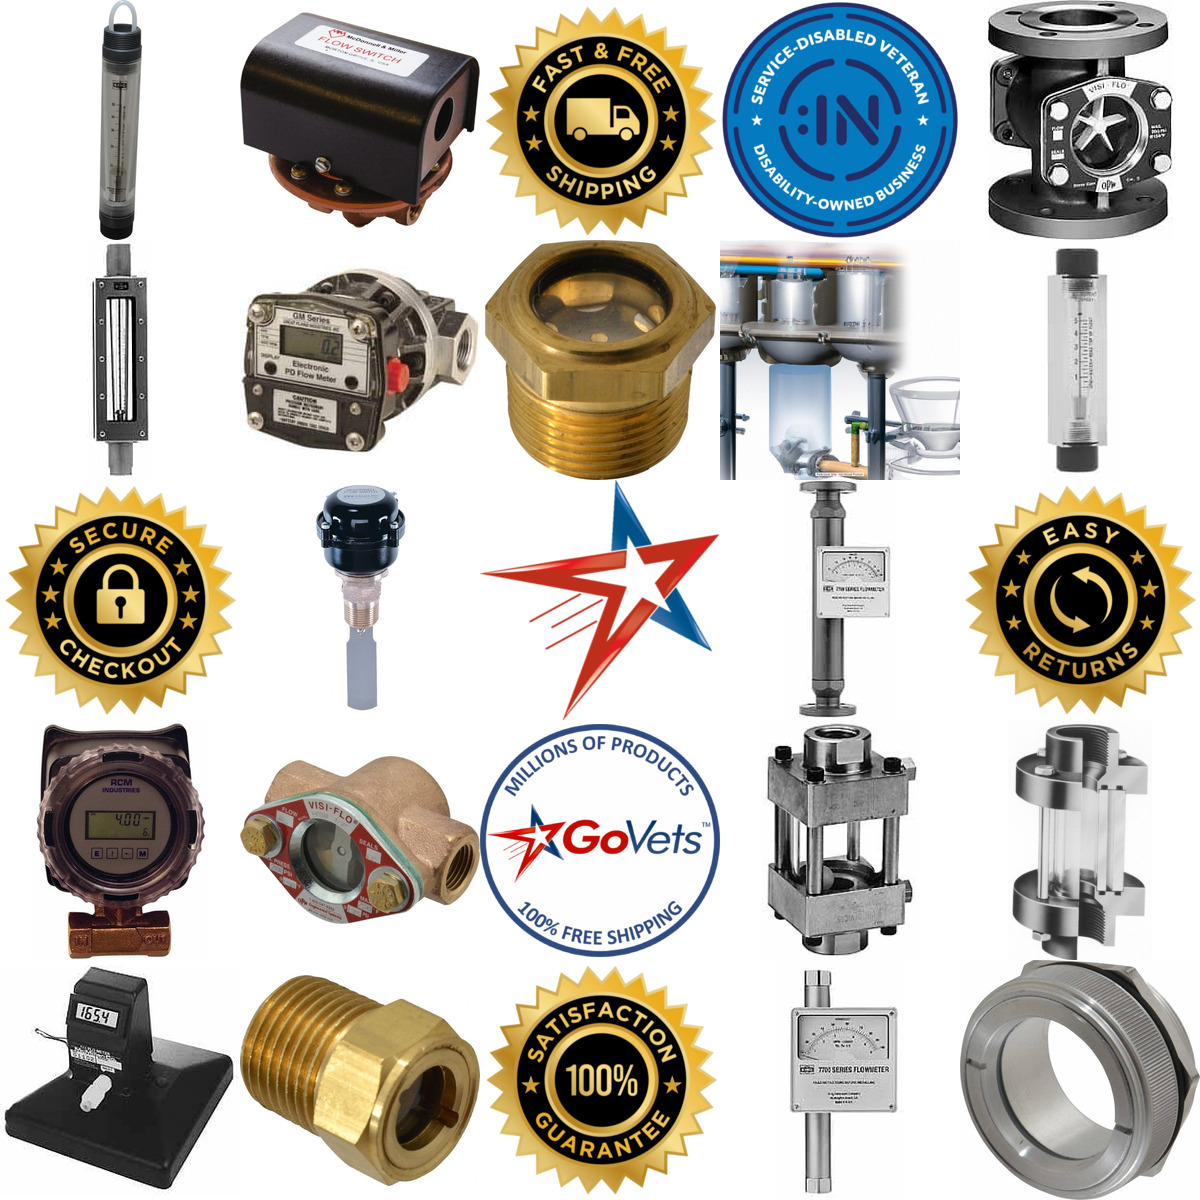 A selection of Liquid Flow Measuring Instruments products on GoVets